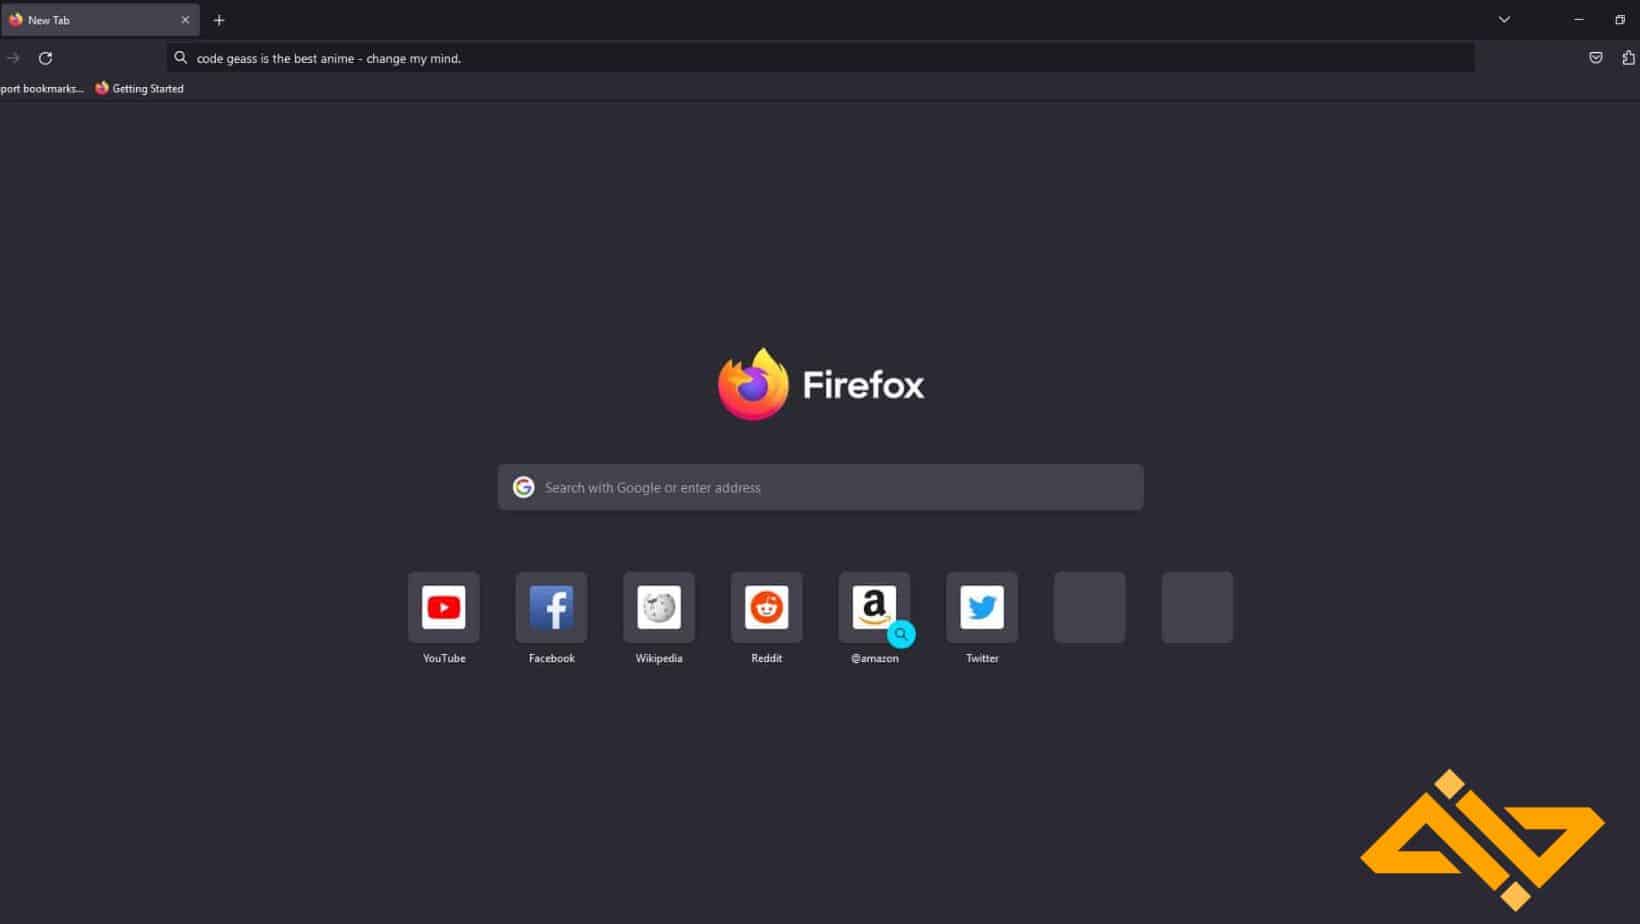 Firefox is a great open-source browser that values your privacy and secures your personal information.